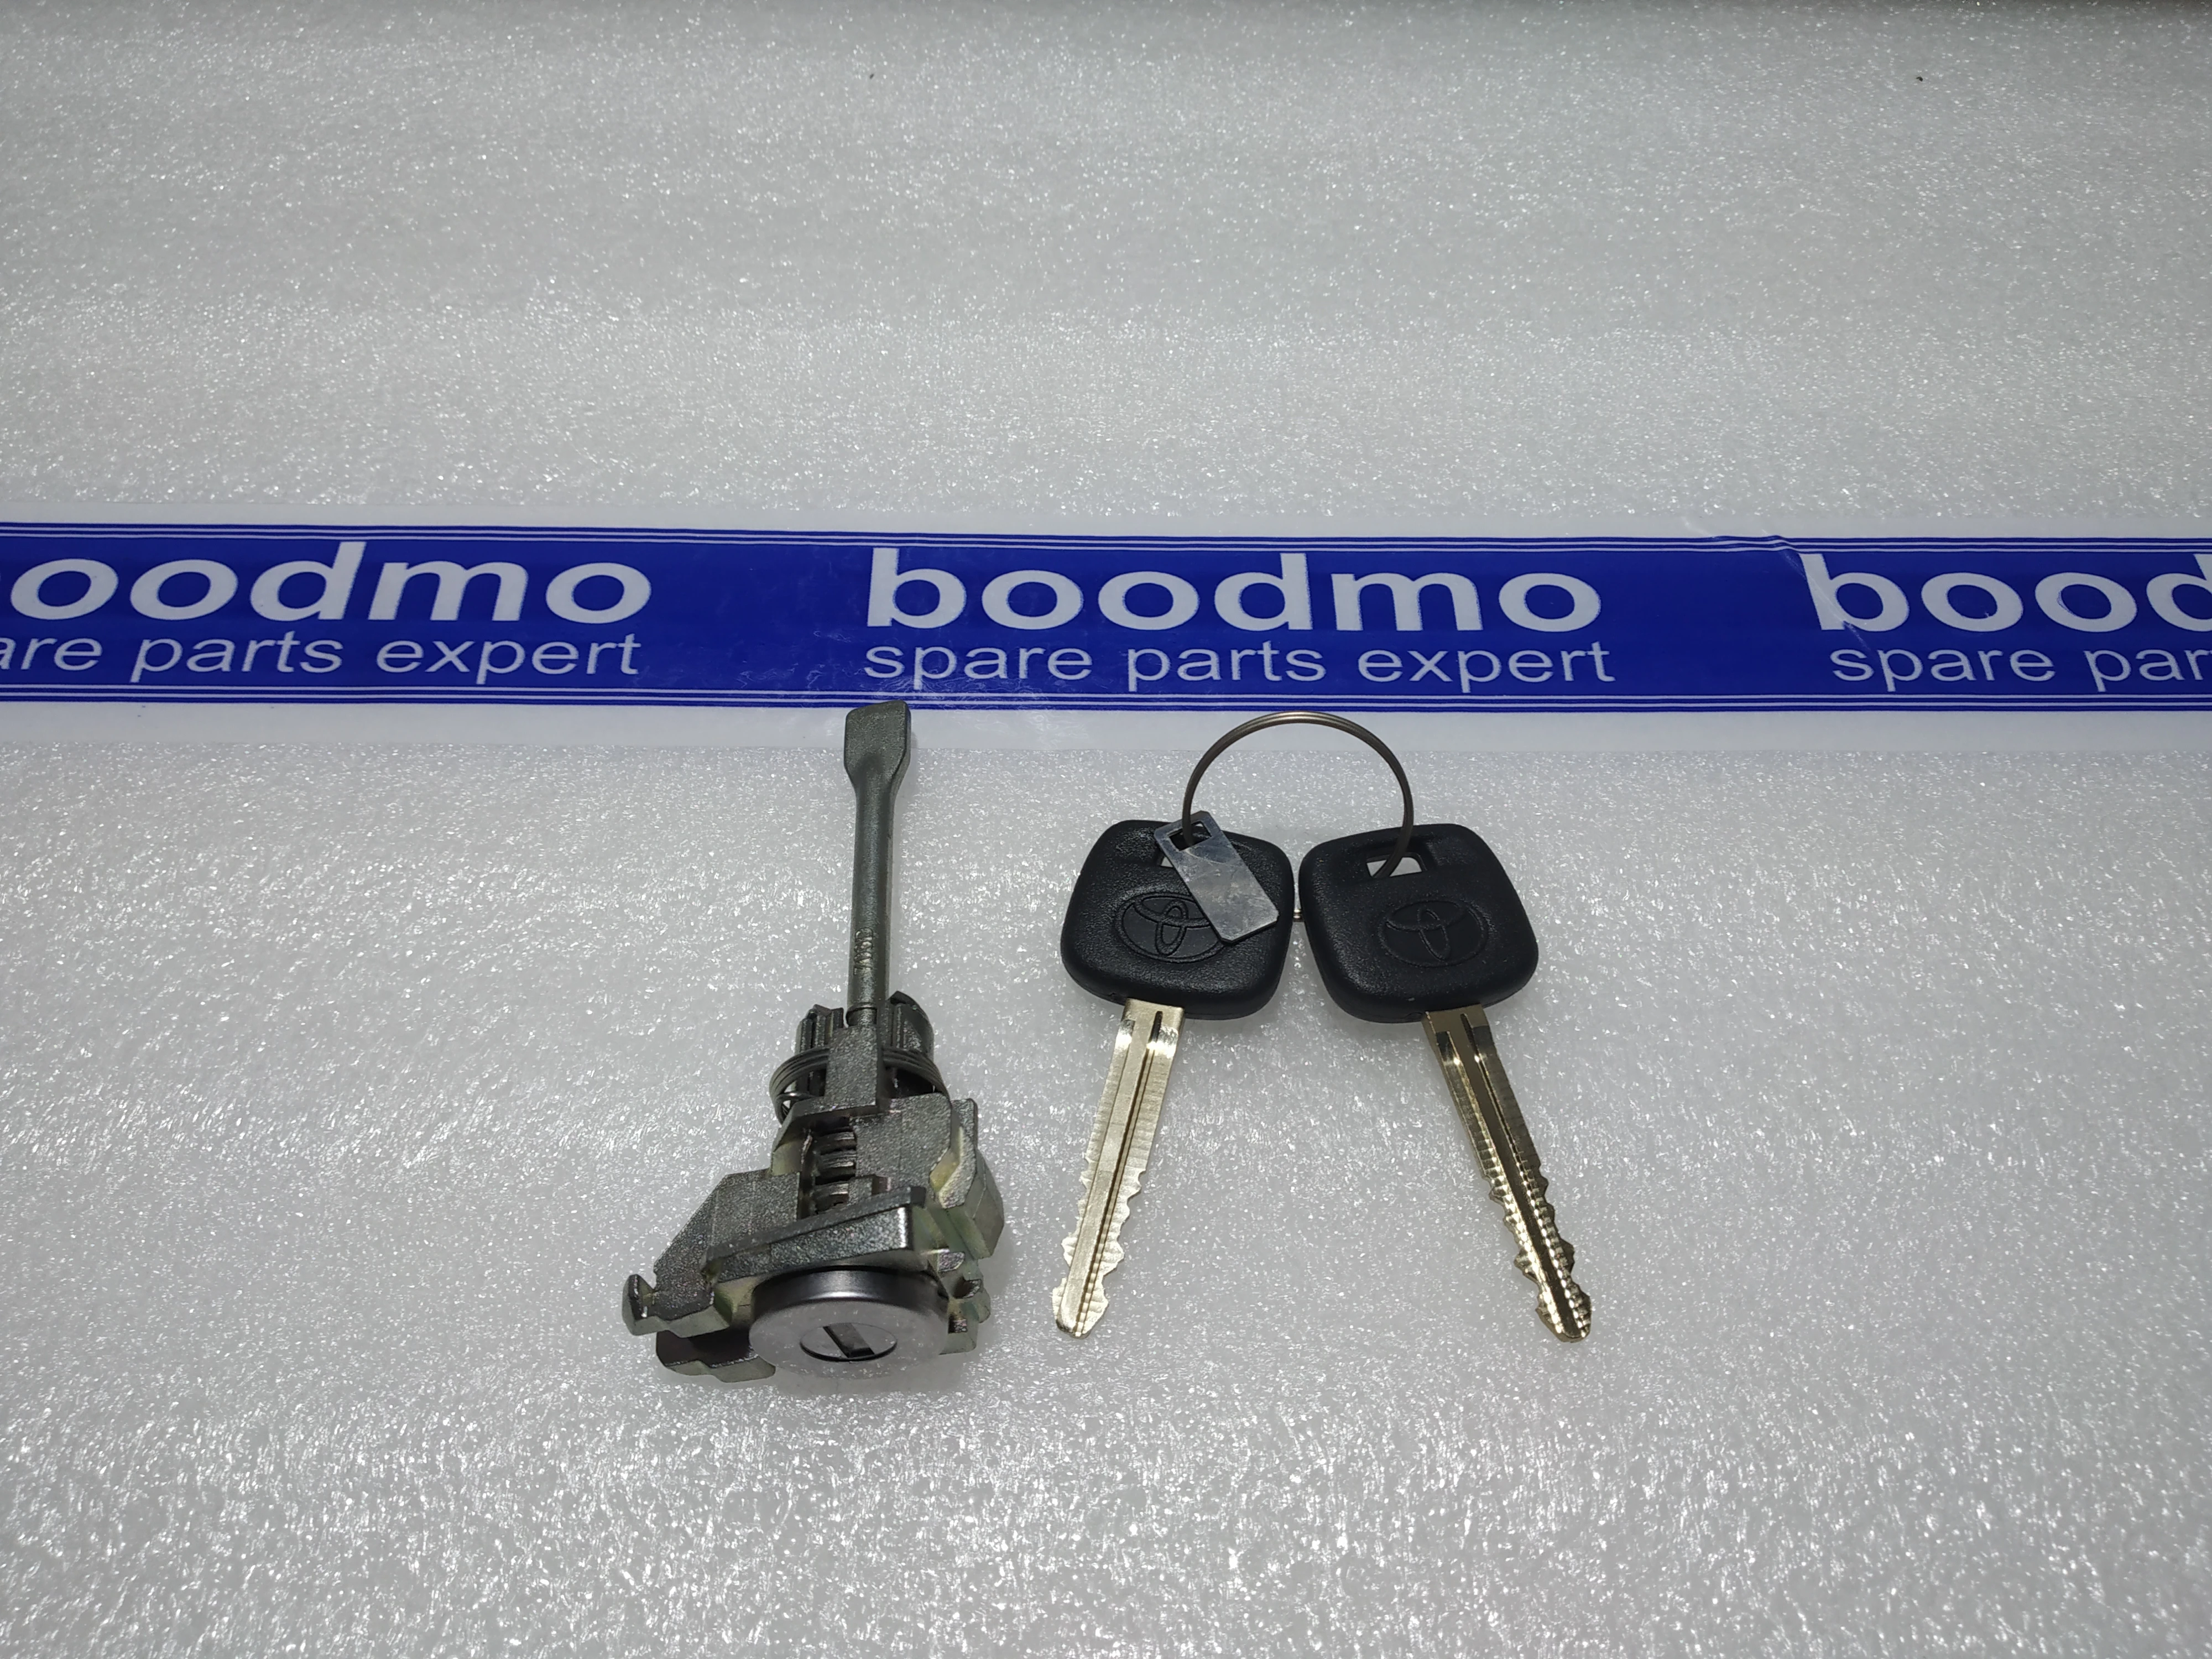 CYLINDER & KEY SET, DOOR LOCK, LH: Toyota / Lexus 69052050  -compatibility, features, prices. boodmo